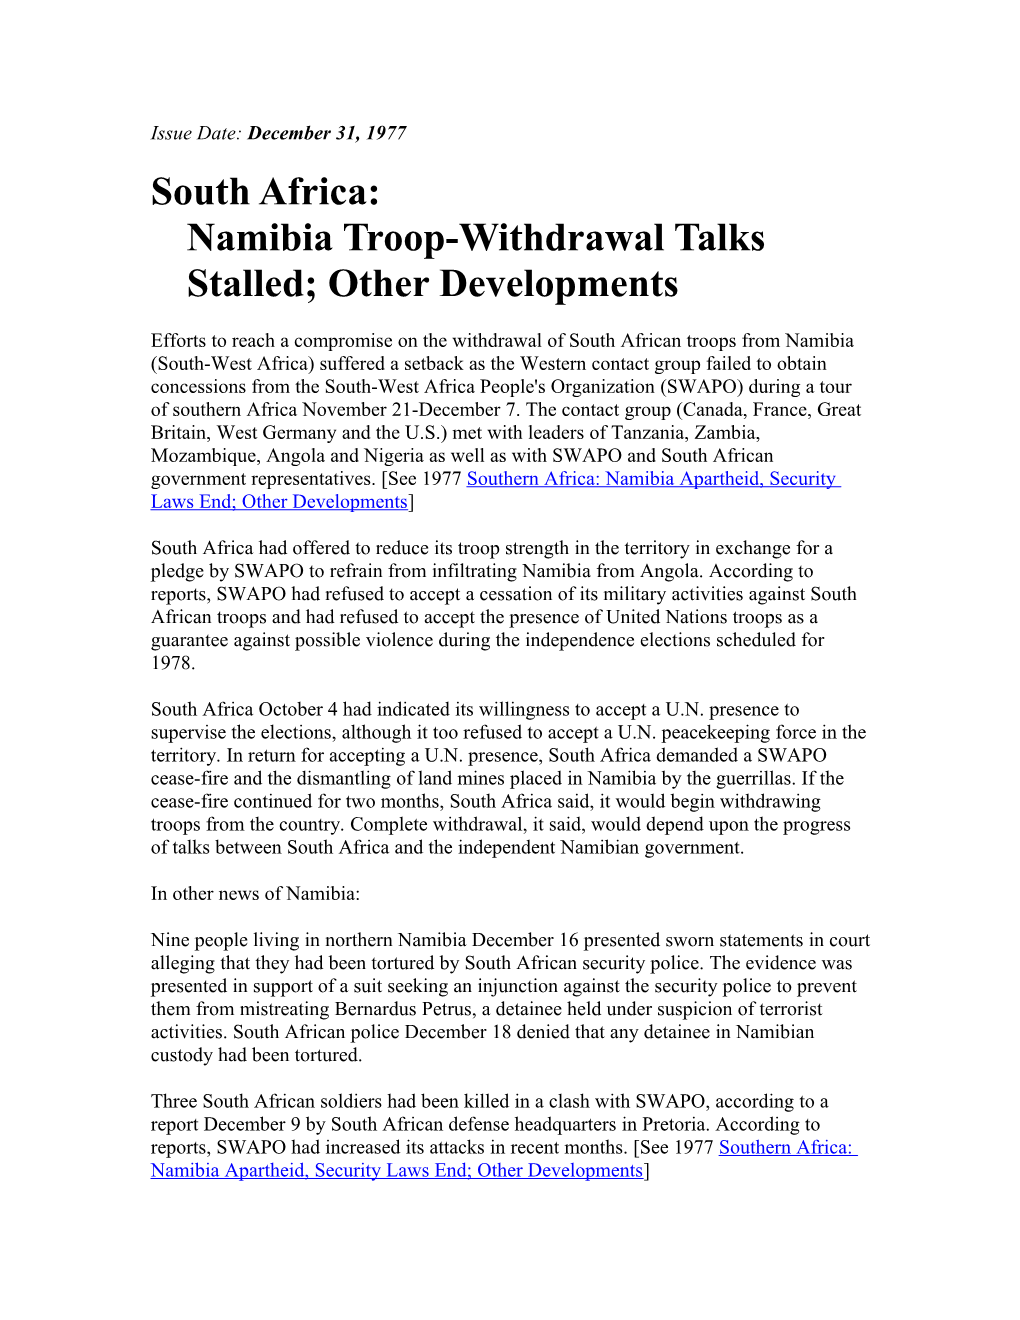 South Africa:Namibia Troop-Withdrawal Talks Stalled; Other Developments